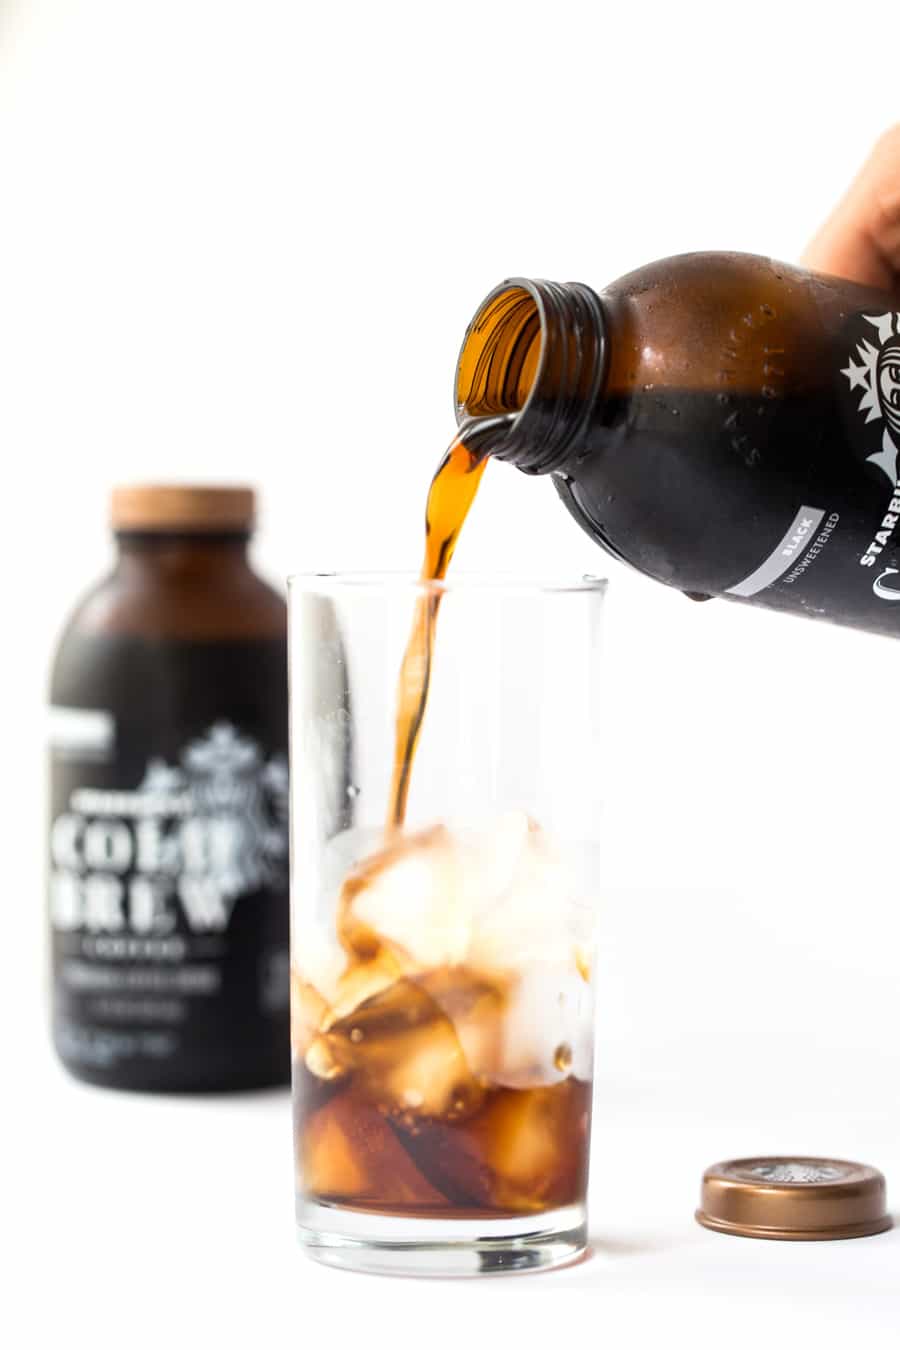 Starbucks Ready-to-Drink Cold Brewed Coffee is the best option when you're choosing a cold steeped coffee!